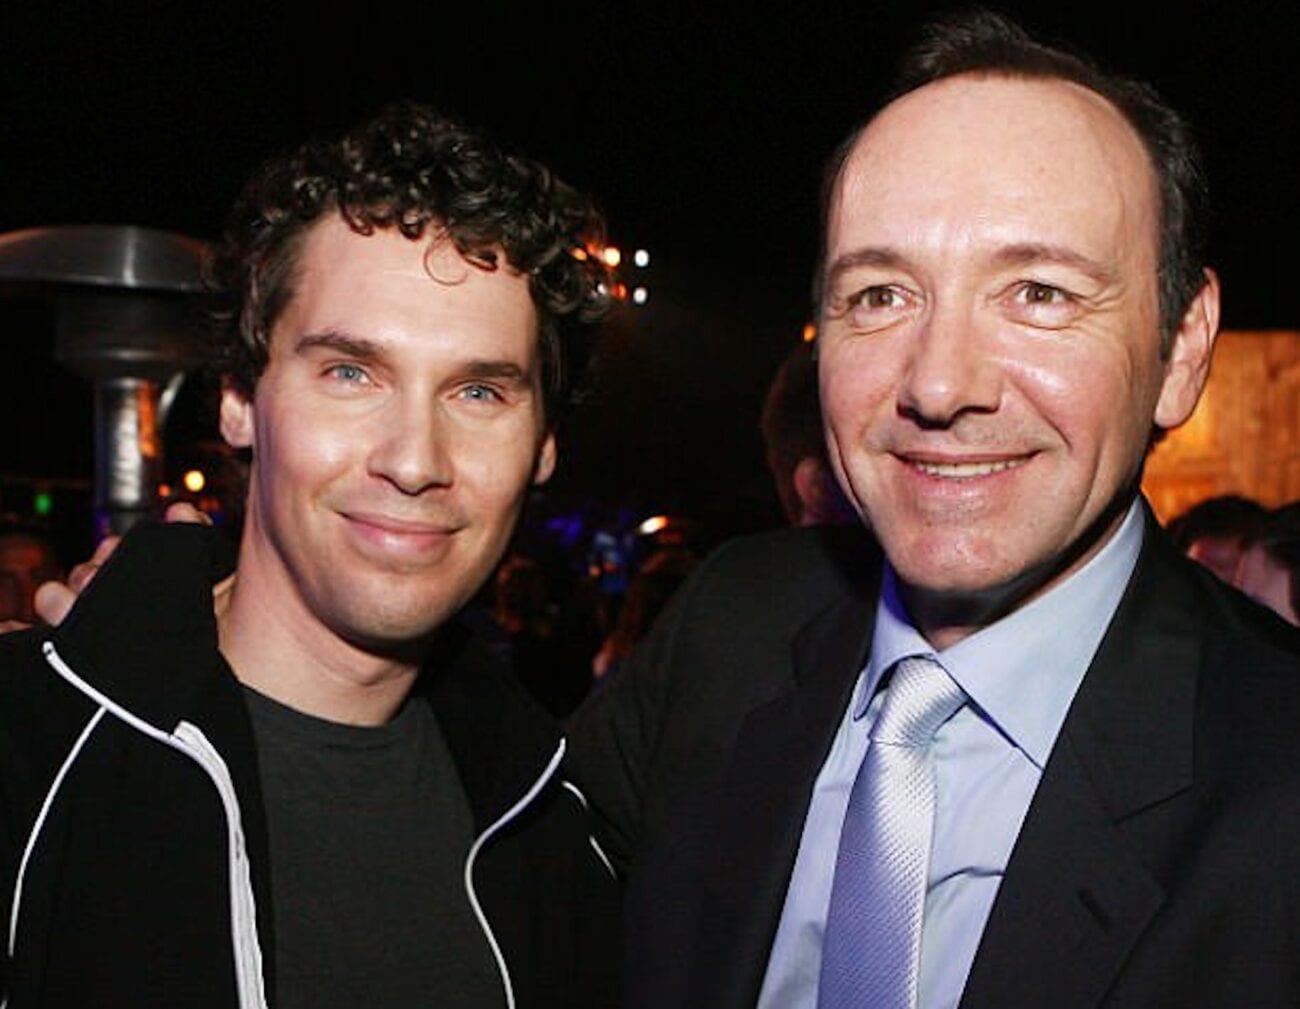 When Bryan Singer was fired from 'Bohemian Rhapsody', most believed it was due to his sexual assault allegations against him. Here's what we know.